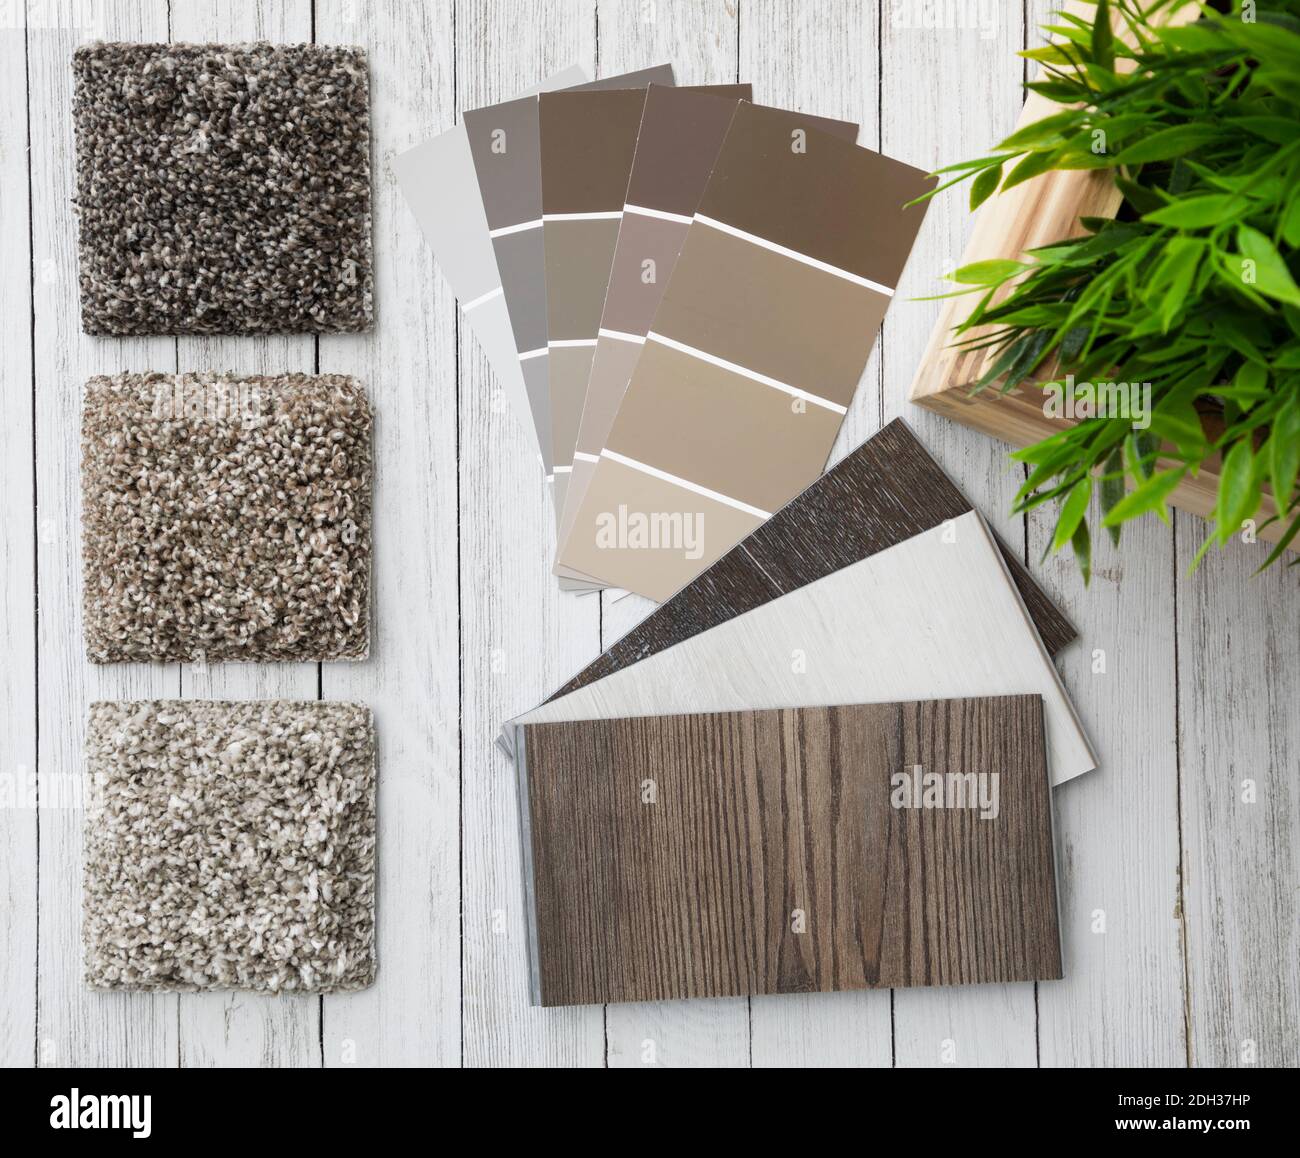 Samples for interior decorating laying on white wood Stock Photo